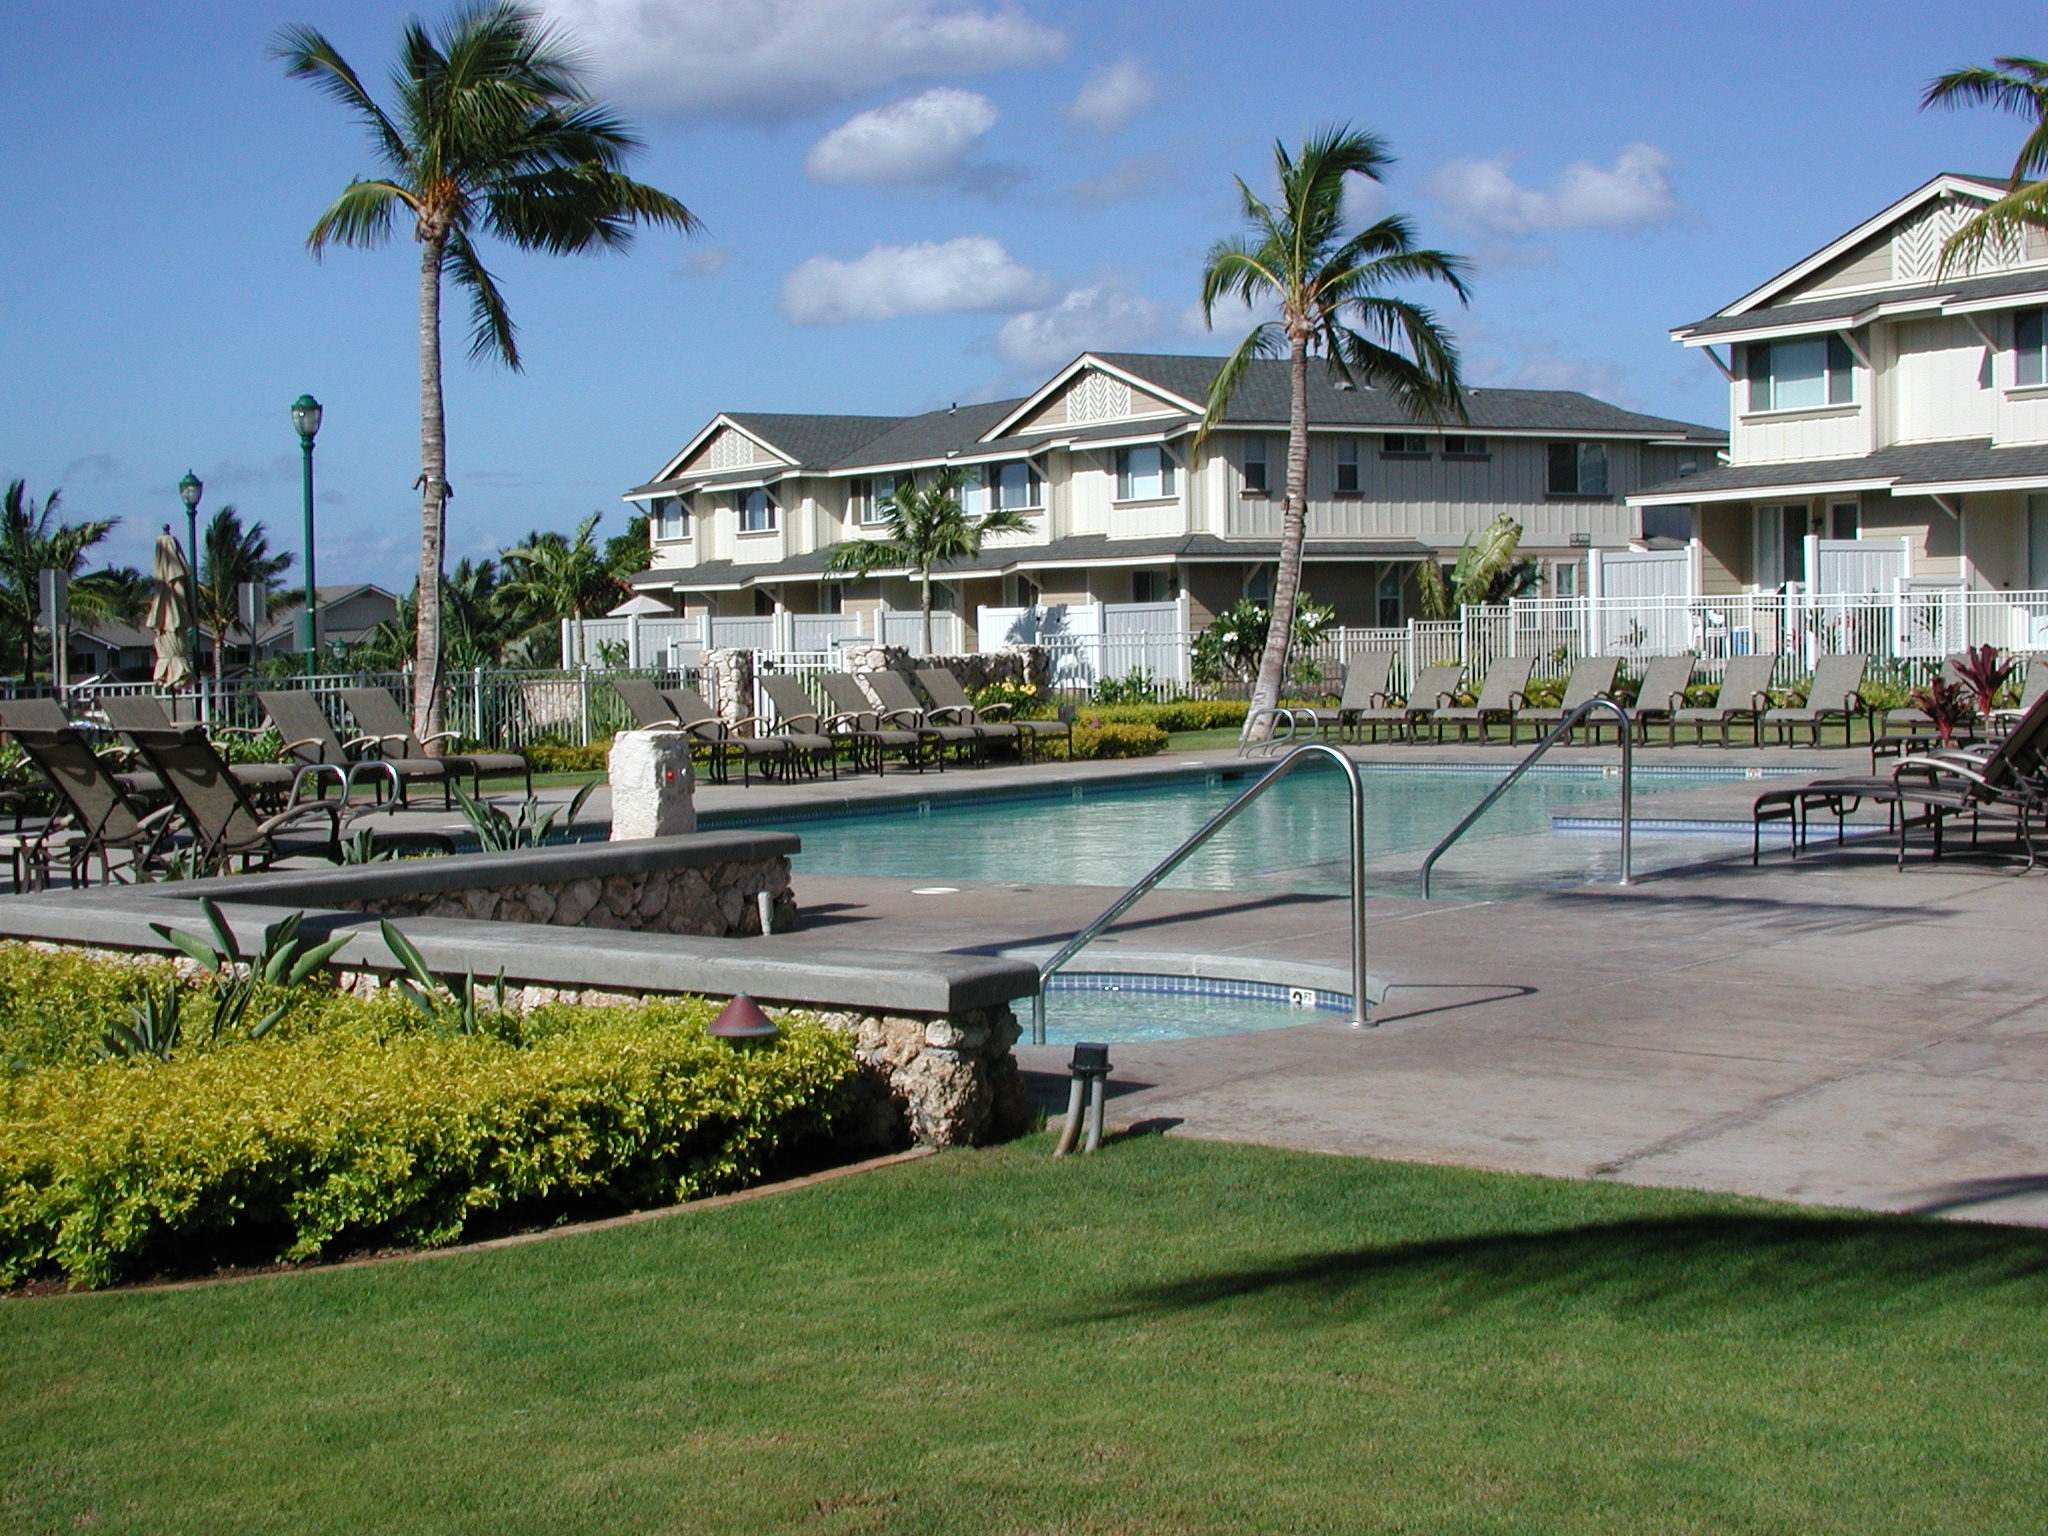 The pool and jacuzzi at the Ko Olina Hillside Villas. Full access during open hours for all residents and guests.